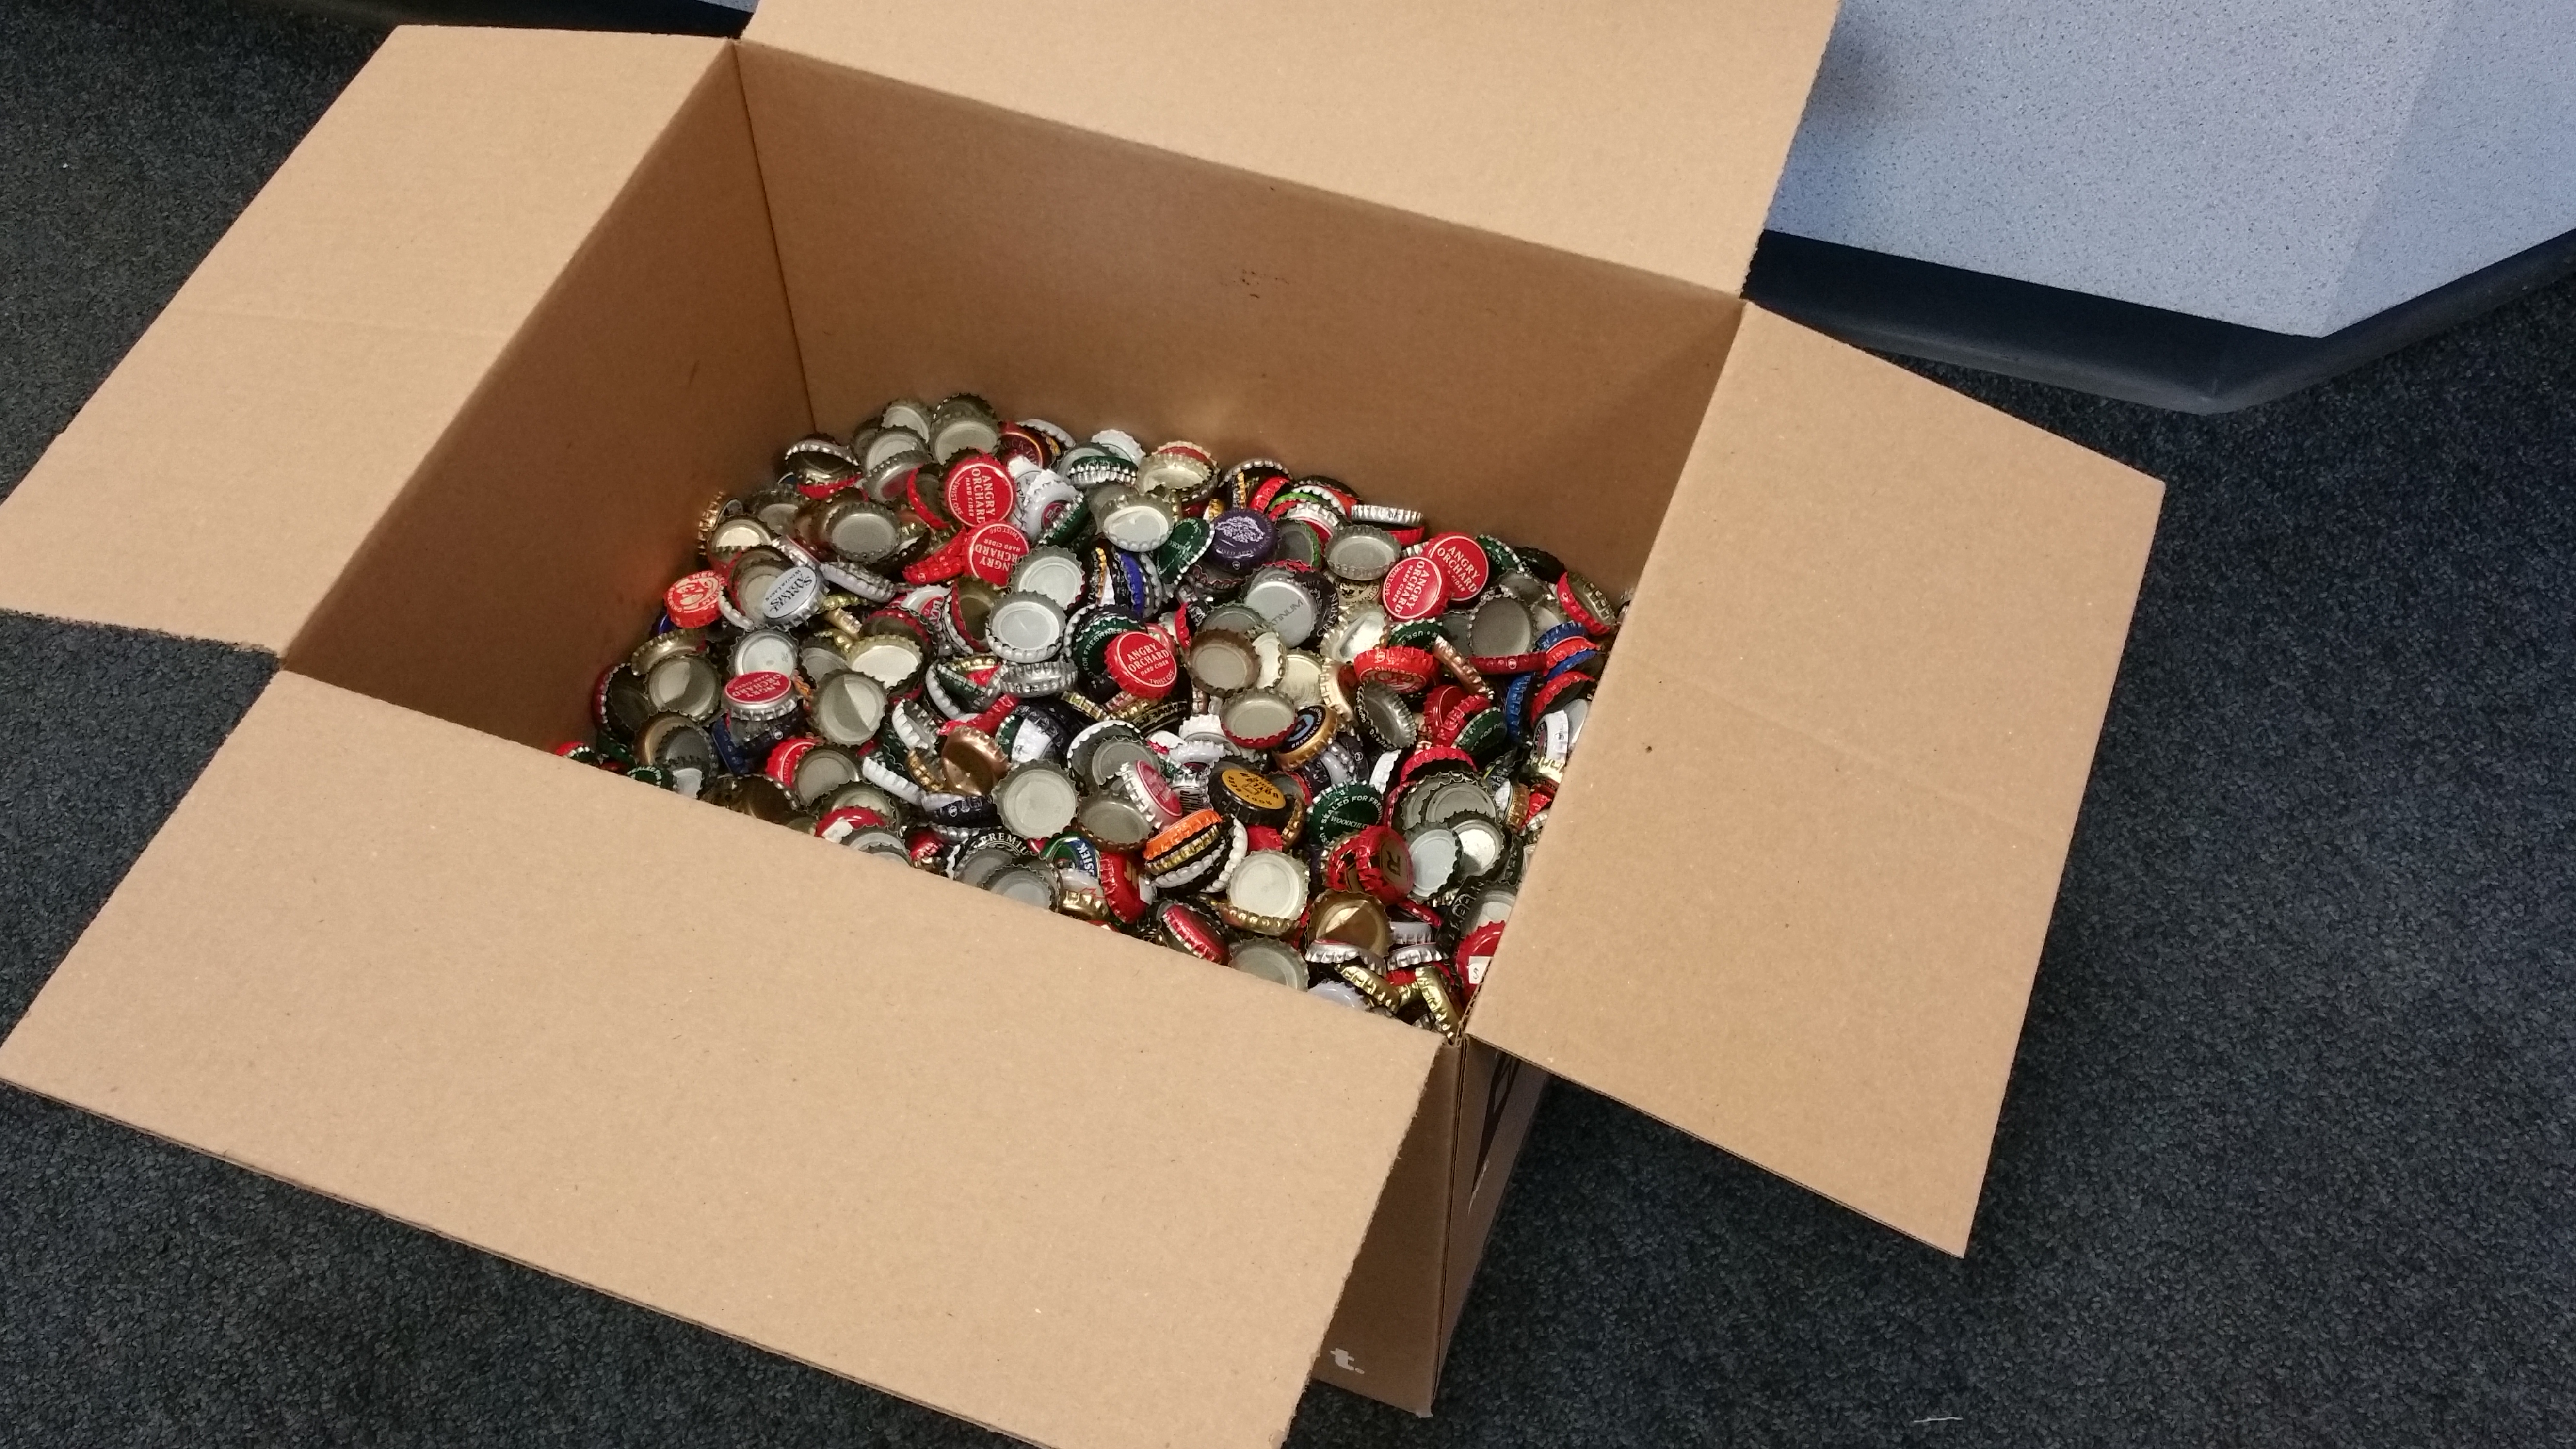 Fan Tries To Pre-order Fallout 4 With Bottlecaps